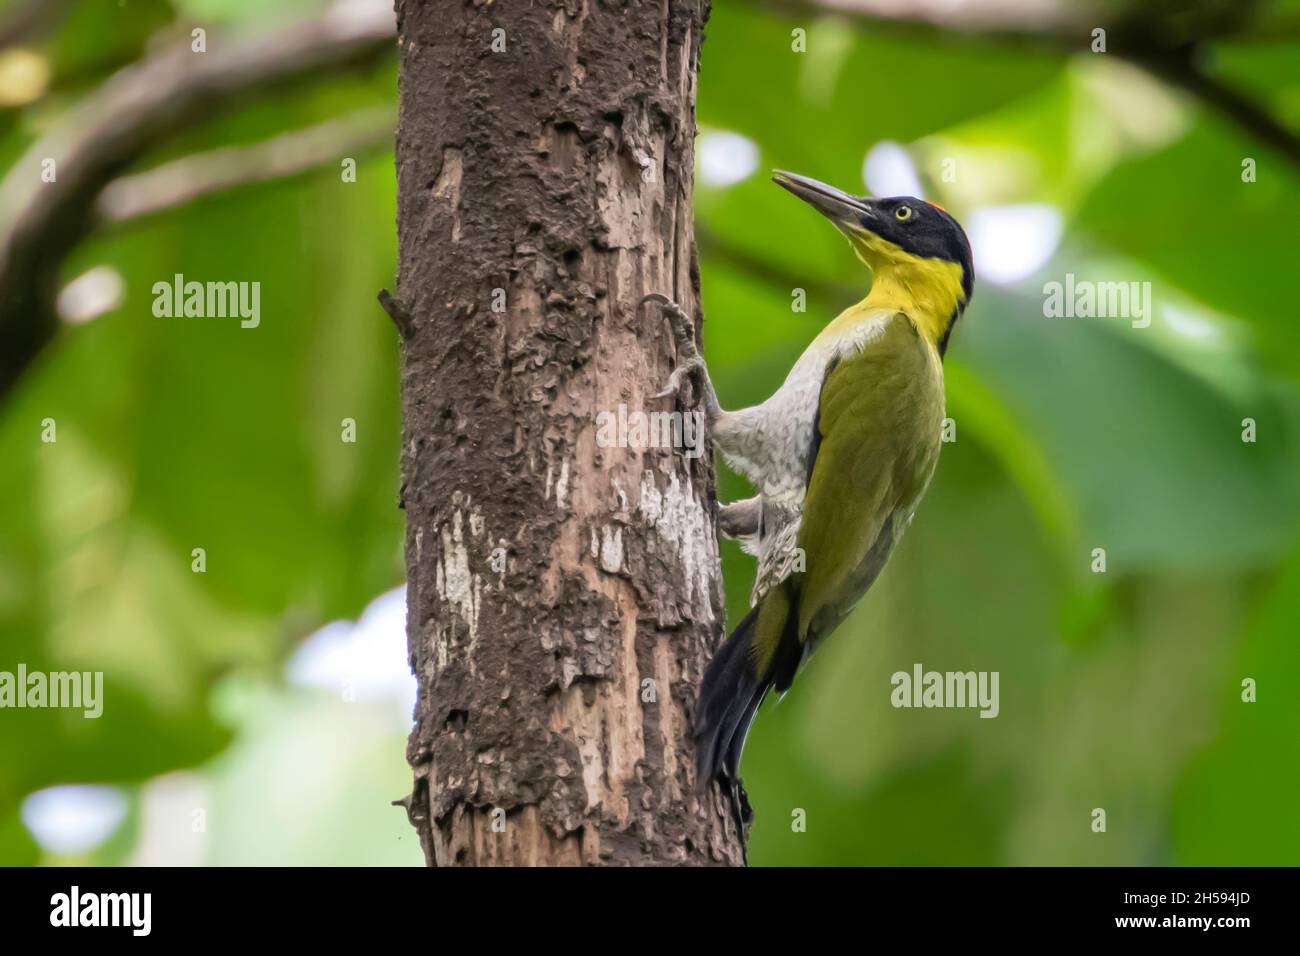 Image of Black-headed Woodpecker (Picus erythropygius)perched on a tree on nature background. Bird. Animals. Stock Photo